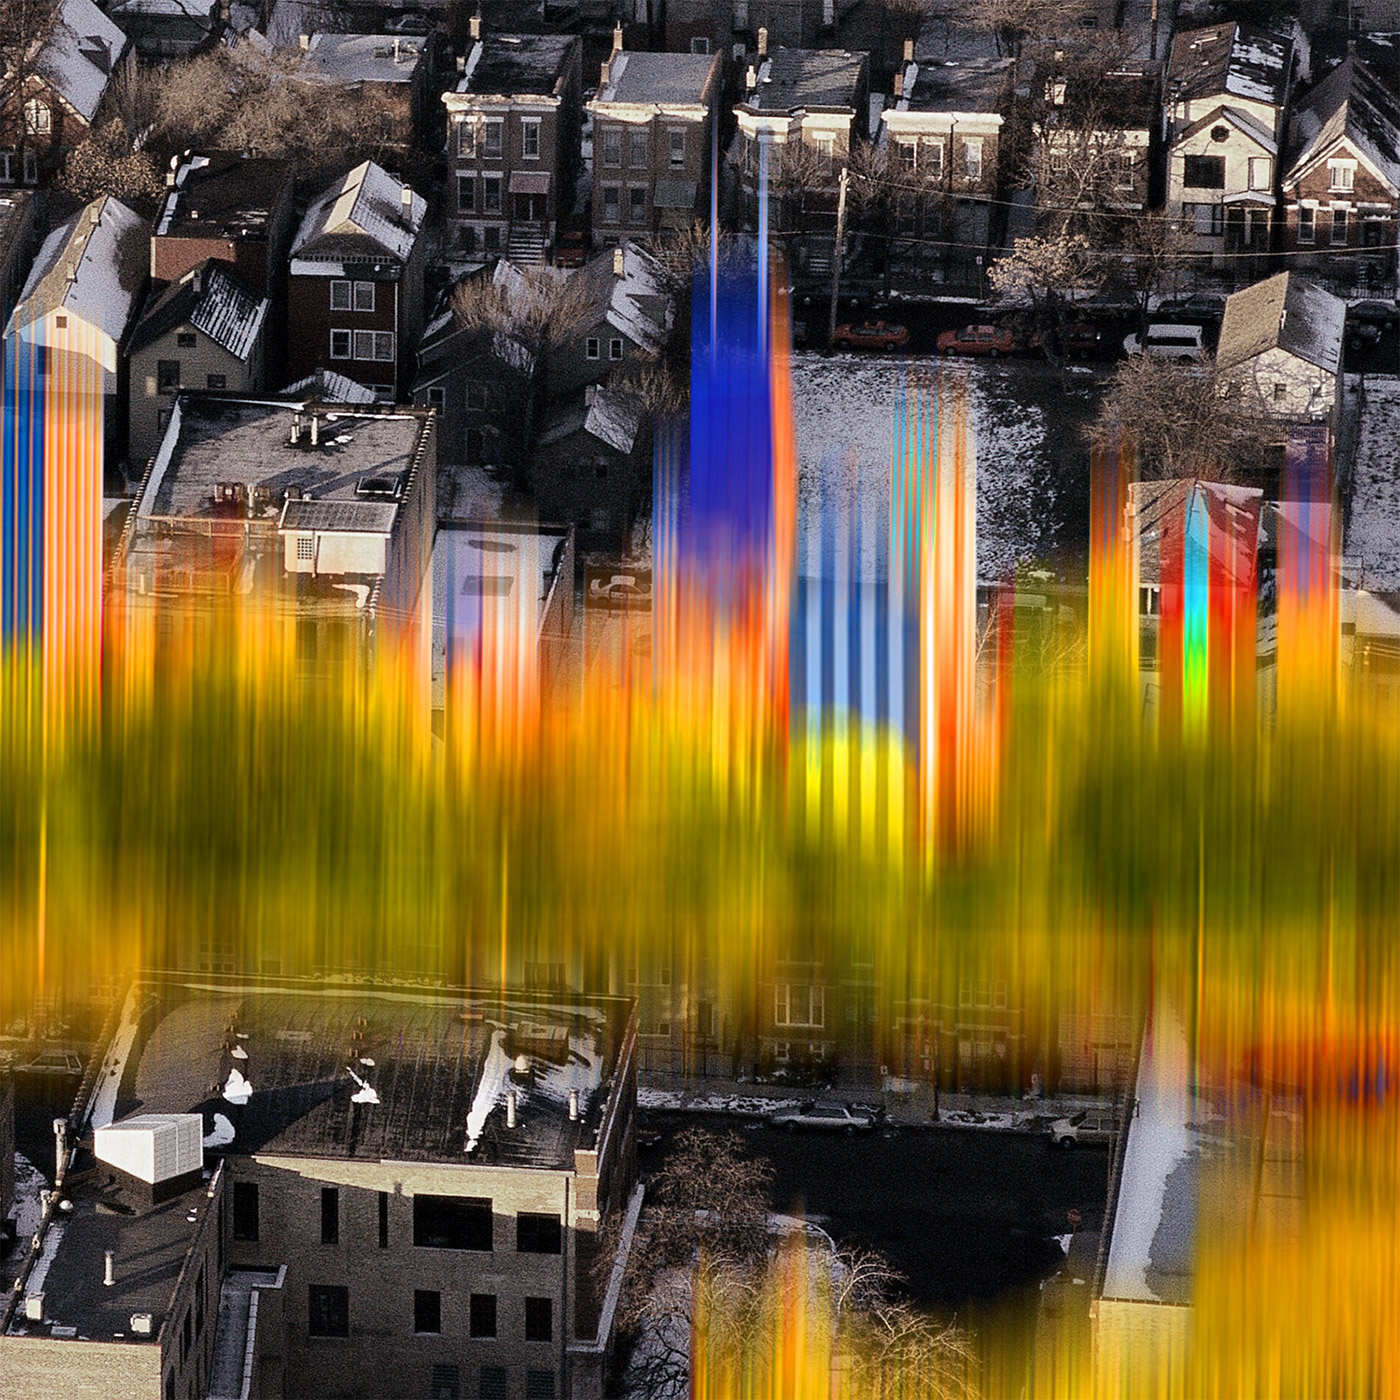 An aerial view photograph of an urban neighborhood, with streaks of yellow, blue, orange, red blurring the center of the photo. In white font on the photograph, ‘psychopolitics and the everyday’.